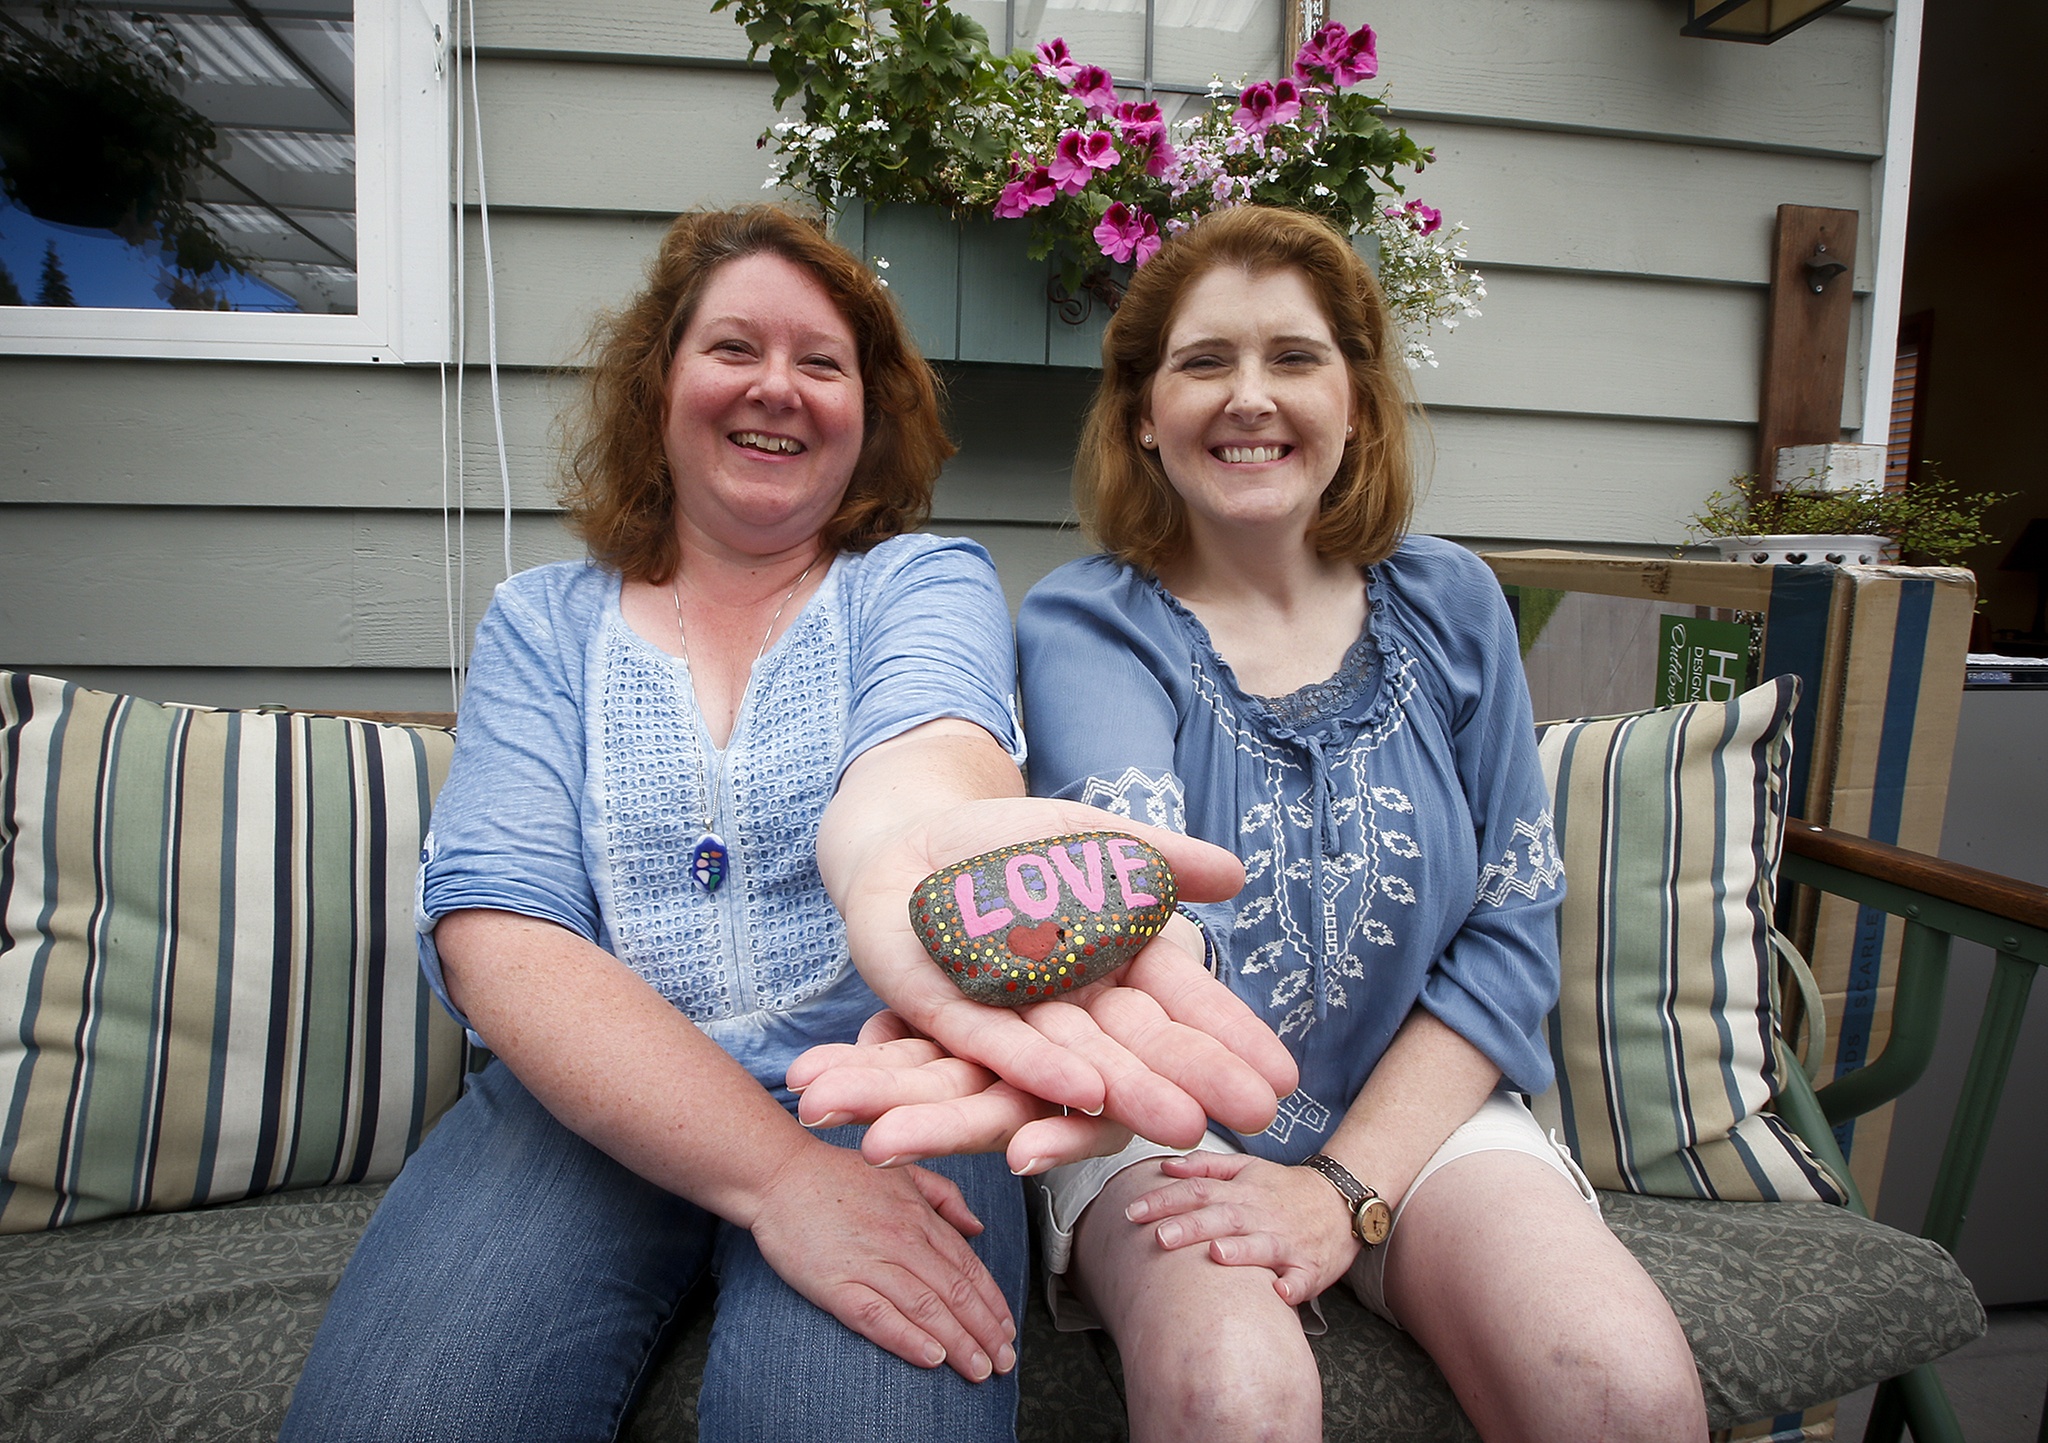 Sisters Jennifer (left) and Jill Nelson have painted and distributed about 75 rocks so far throughout Edmonds as part of their “Edmonds Rocks” group which aims to bring a little joy into the lives of people who stumble upon their creations. “The kids get so excited when they find something they like,” Jennifer Nelson said. (Ian Terry / The Herald)